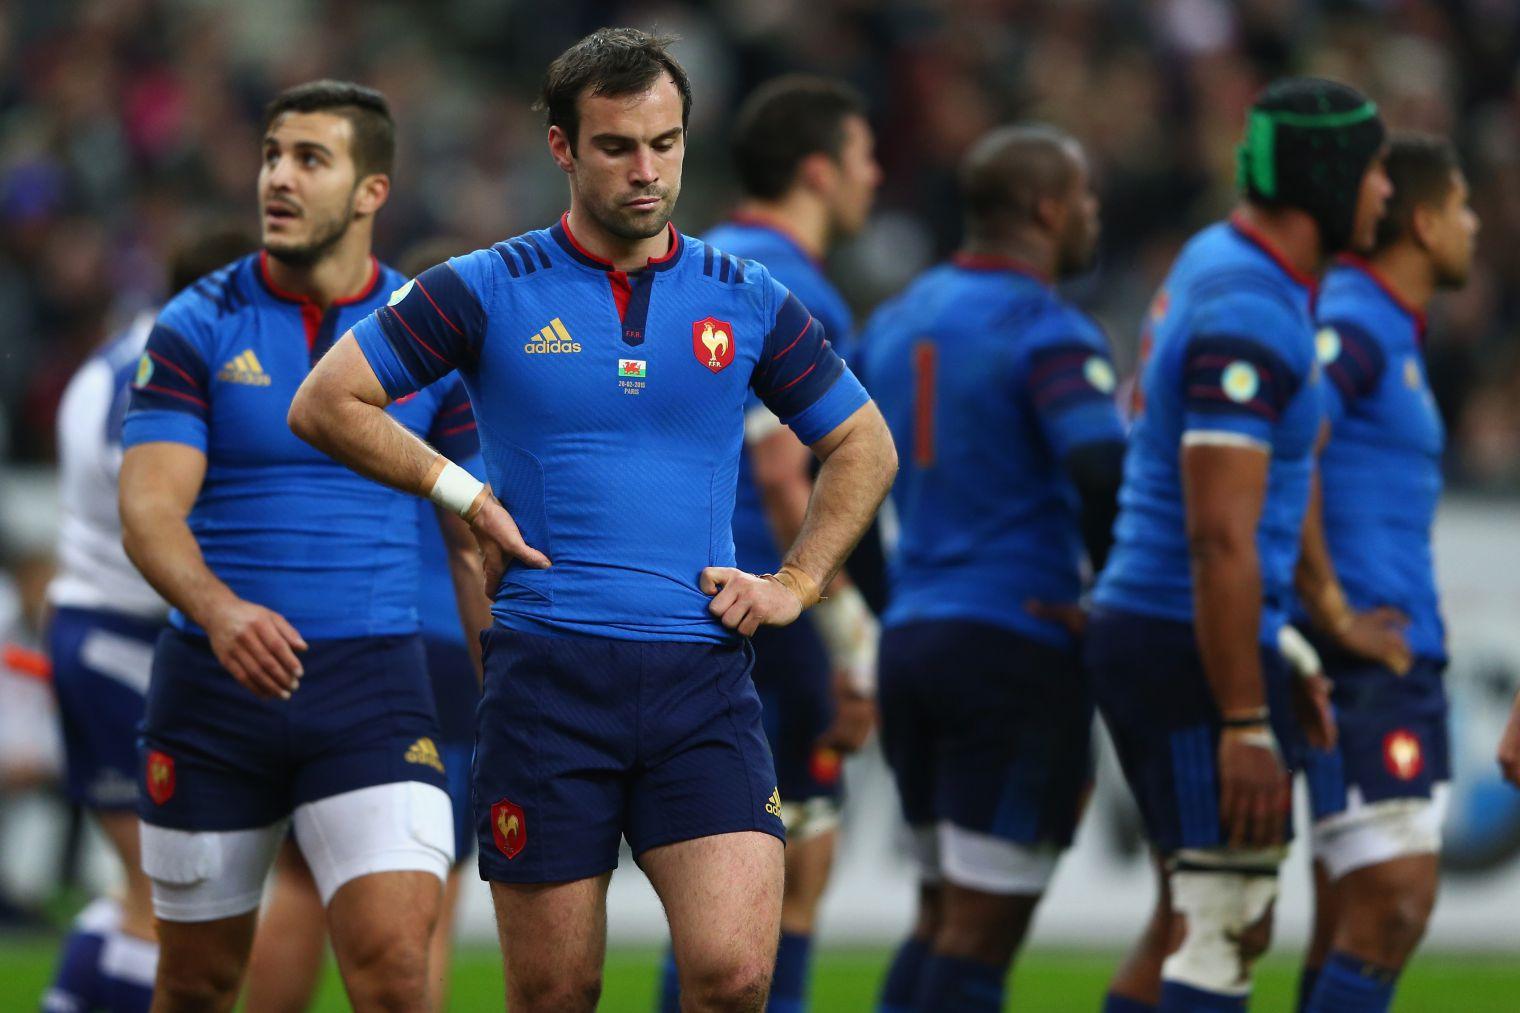 The French rugby team is staying in Croydon and they are not happy